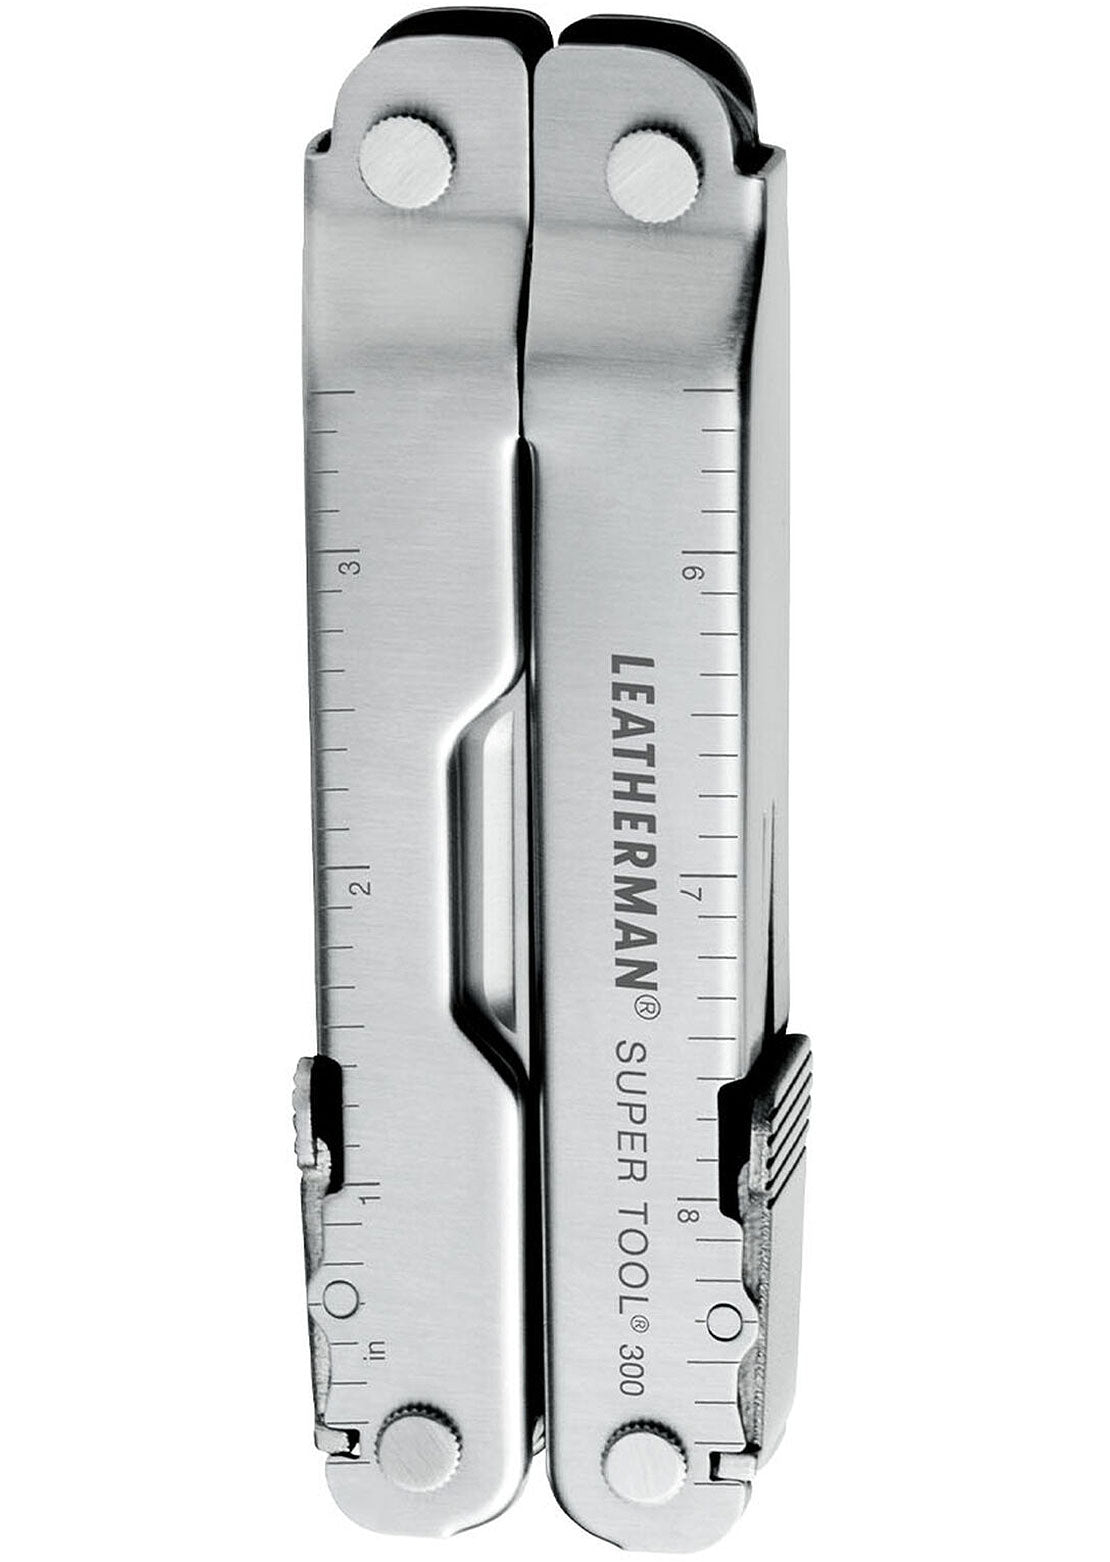 Leatherman Super Tool 300 Stainless